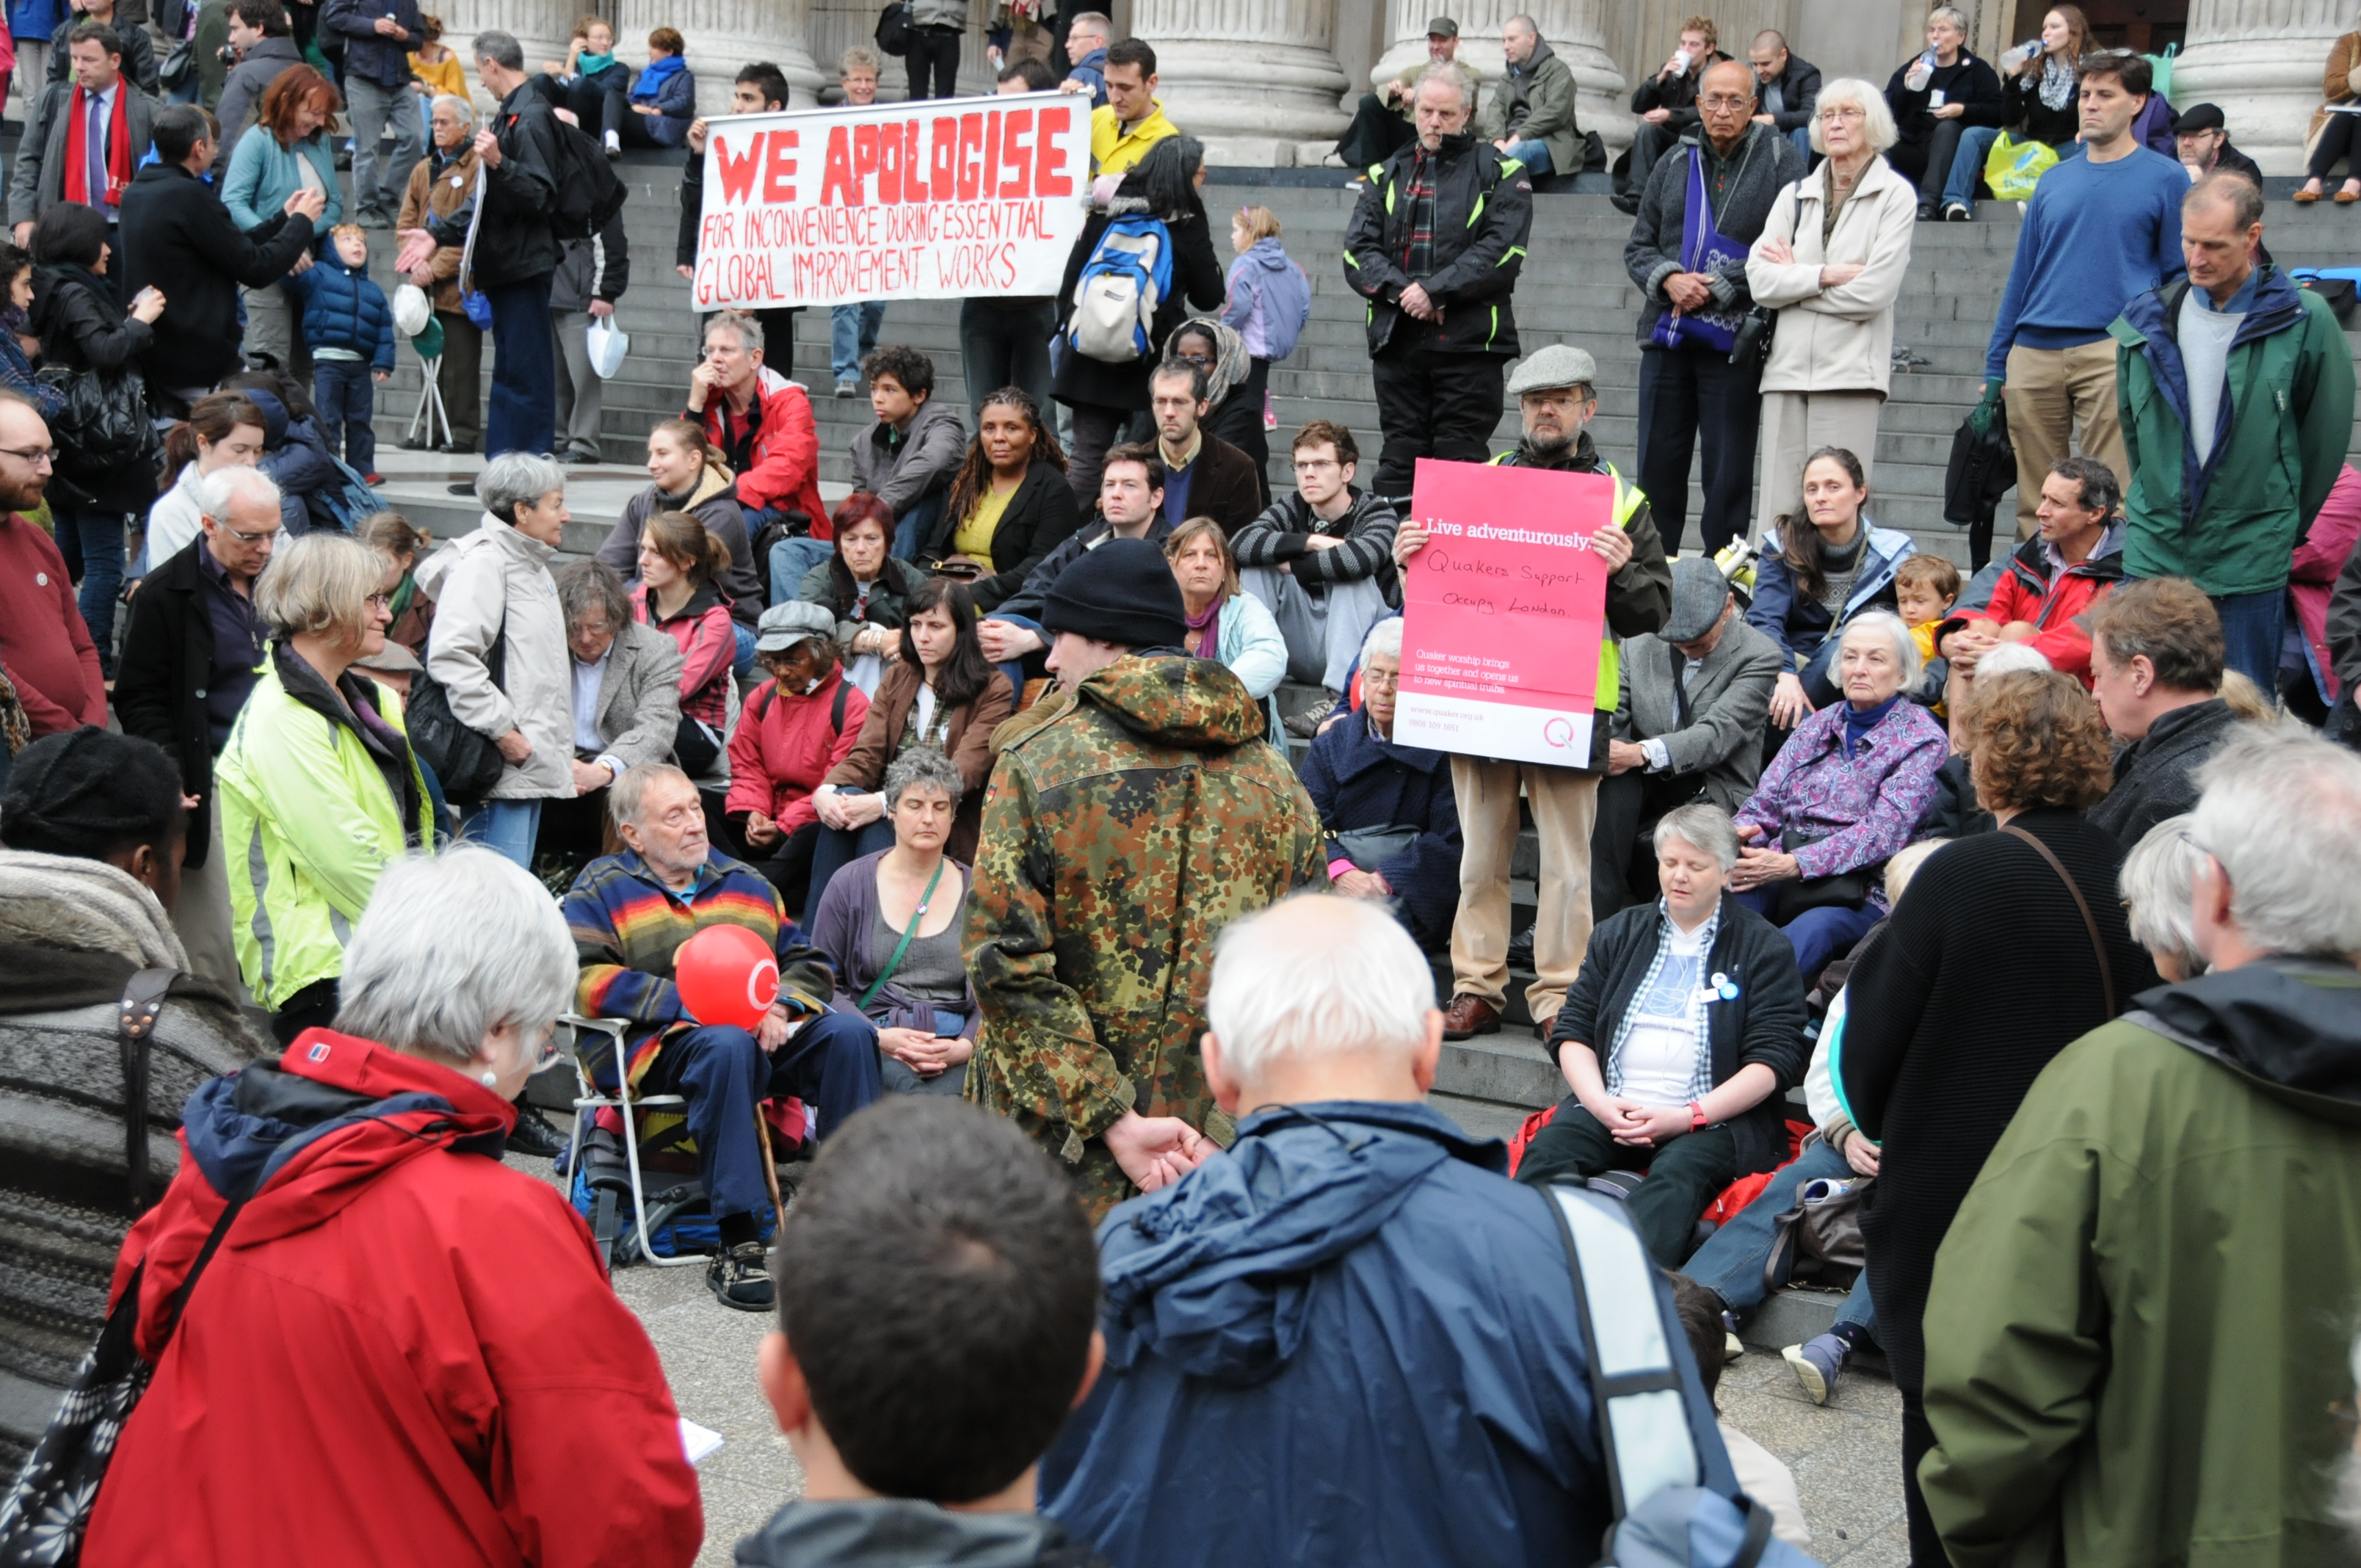 Meeting for worship during Occupy